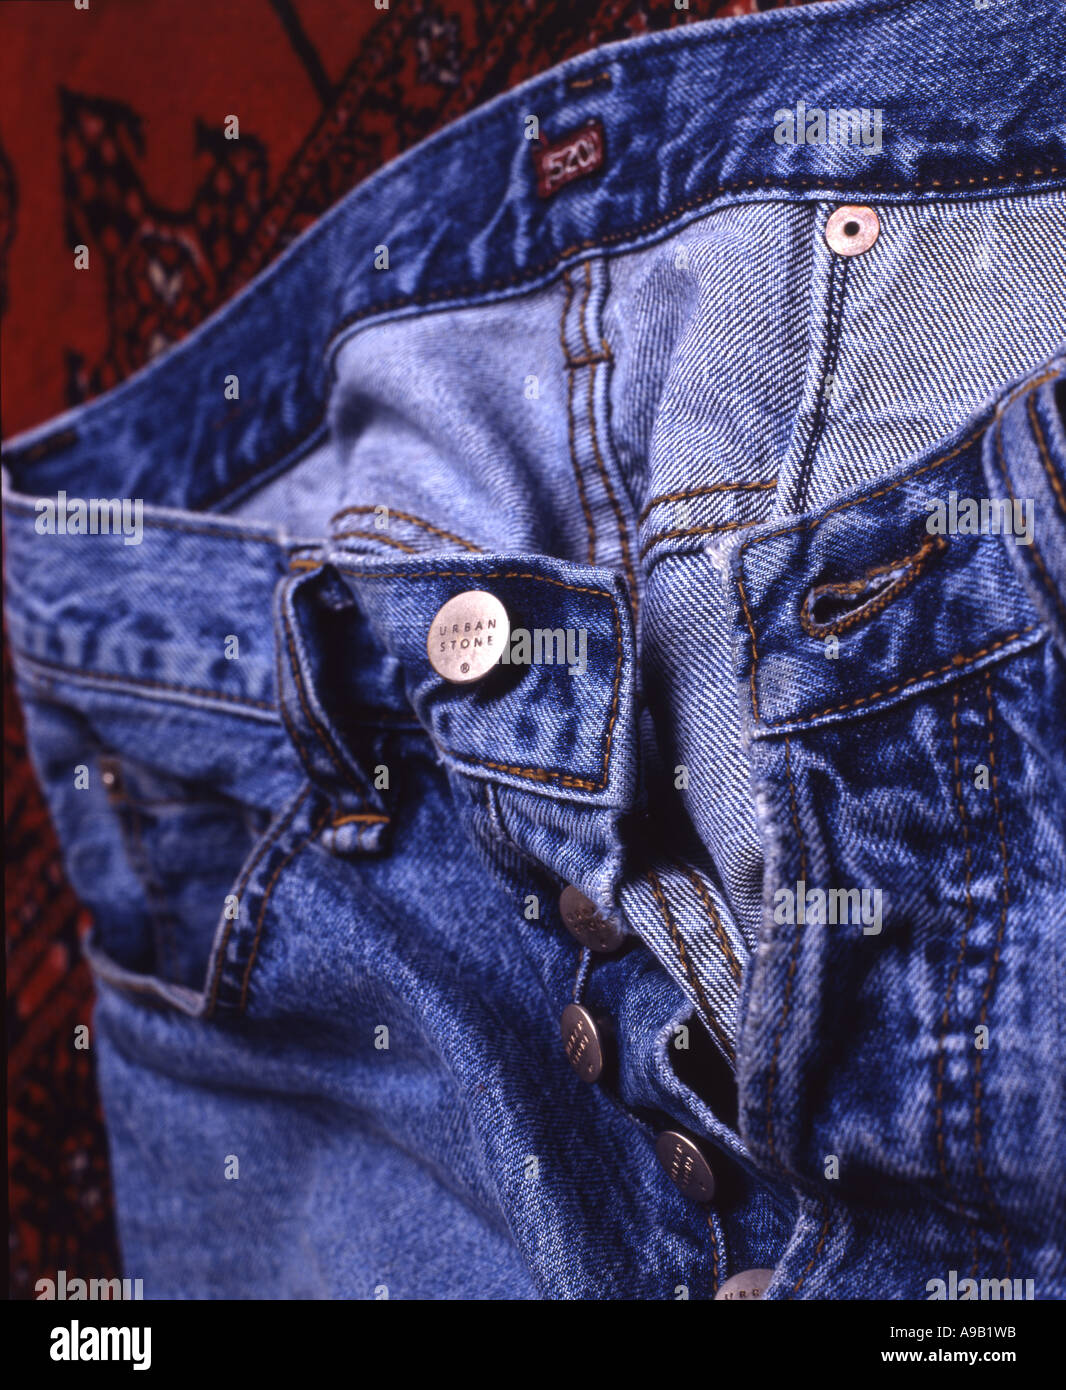 Detail of denim jeans, close-up! Stock Photo